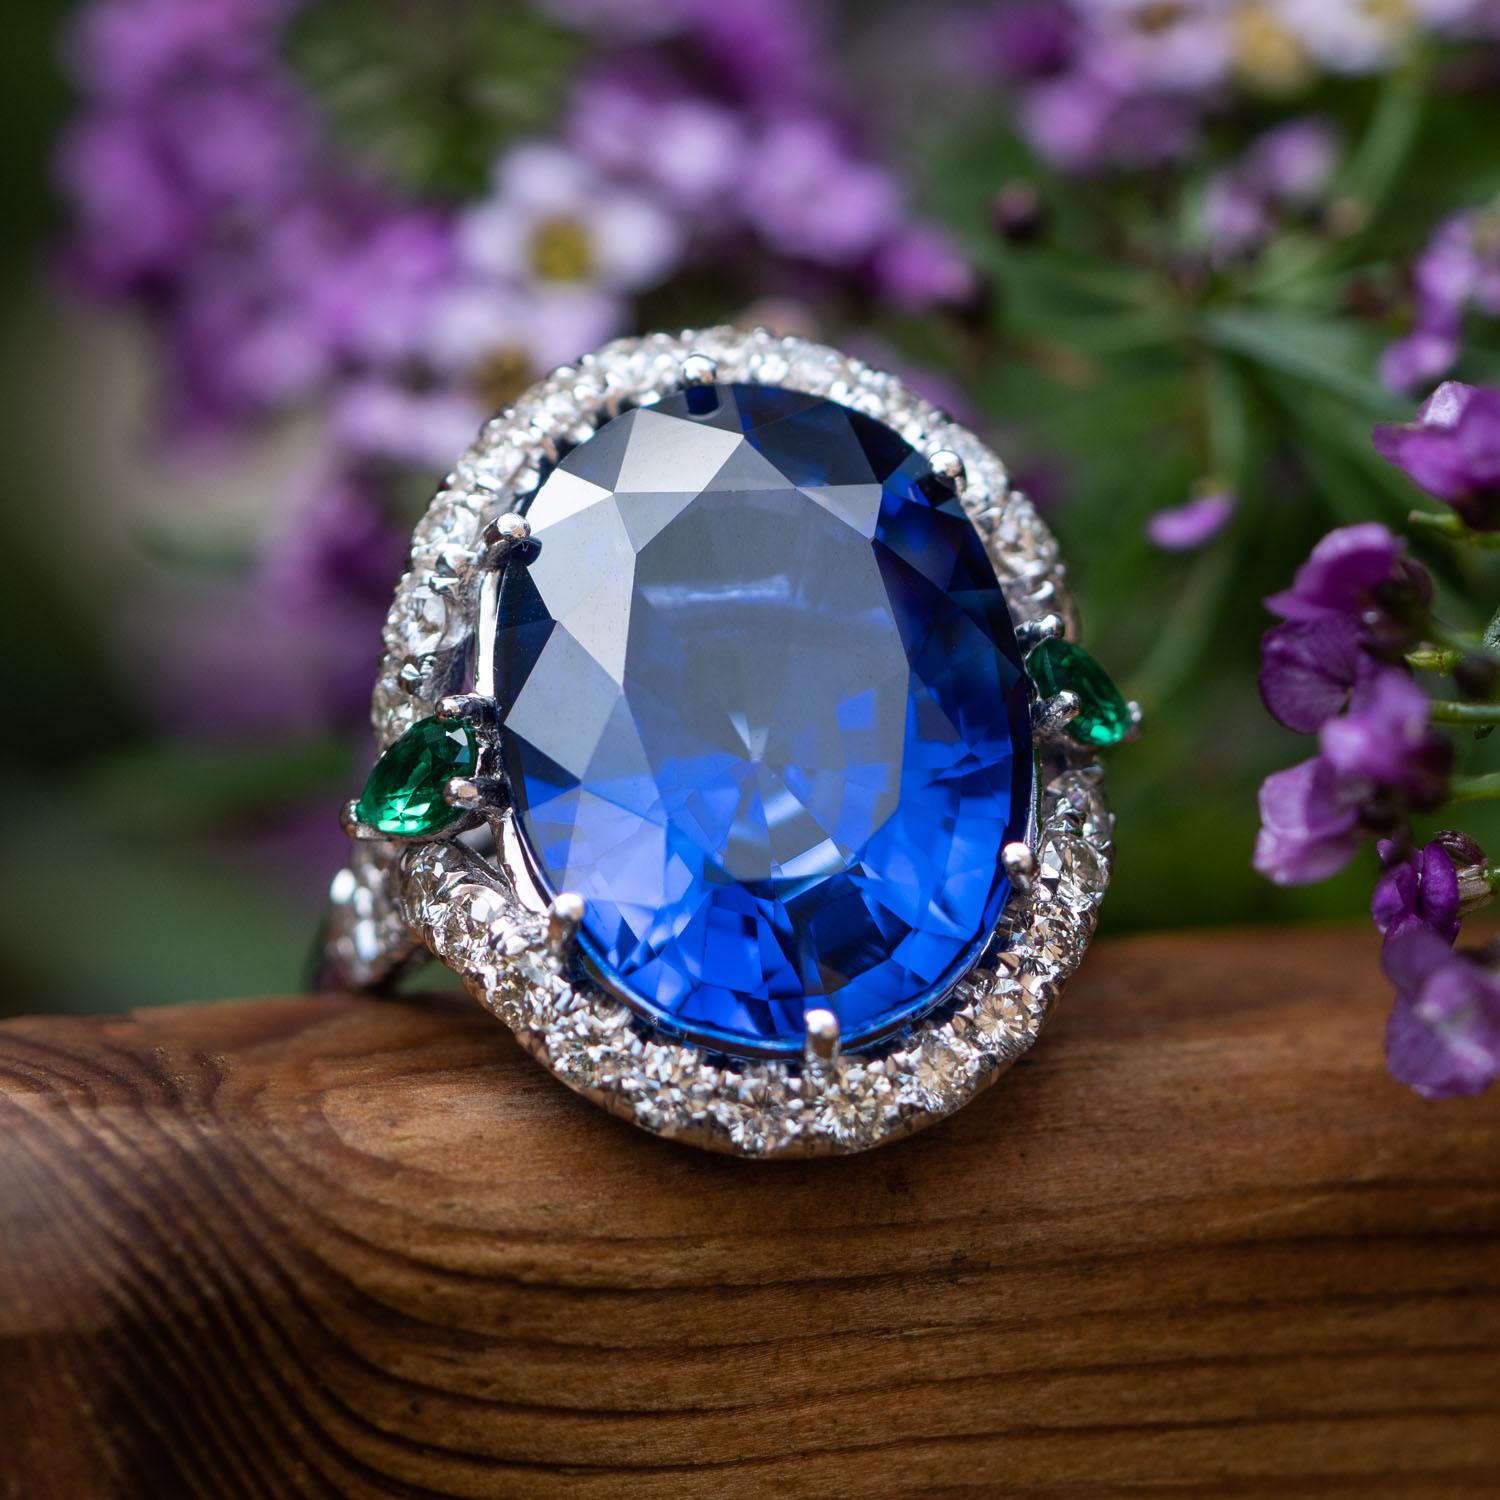 History’s most memorable fine jewelry - crowns, scepters, necklaces, and more - all share a common design element: several types of precious stones. Our Juliana Oval Sapphire Ring takes on this clever technique and puts it on stunning display: the